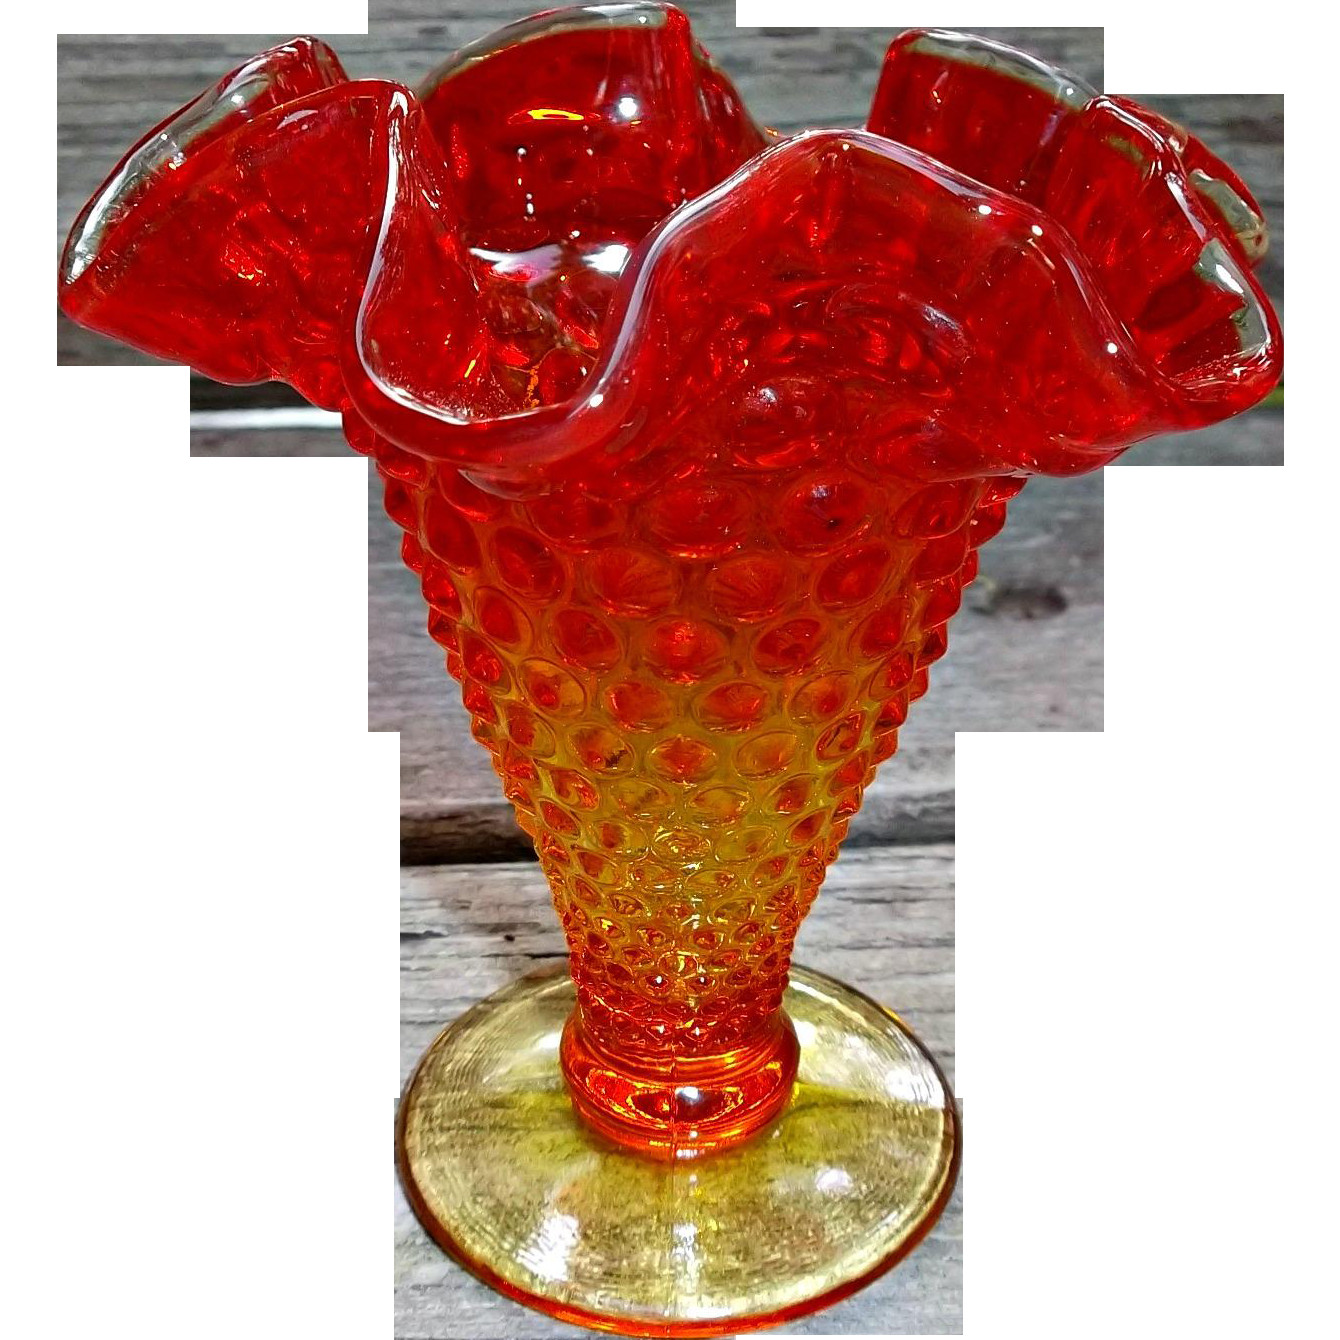 12 Fashionable Amber Glass Vase 2024 free download amber glass vase of reddish amber glassware www topsimages com throughout small vintage glass amberina hobnail vase crimped edge glass png 1340x1340 reddish amber glassware